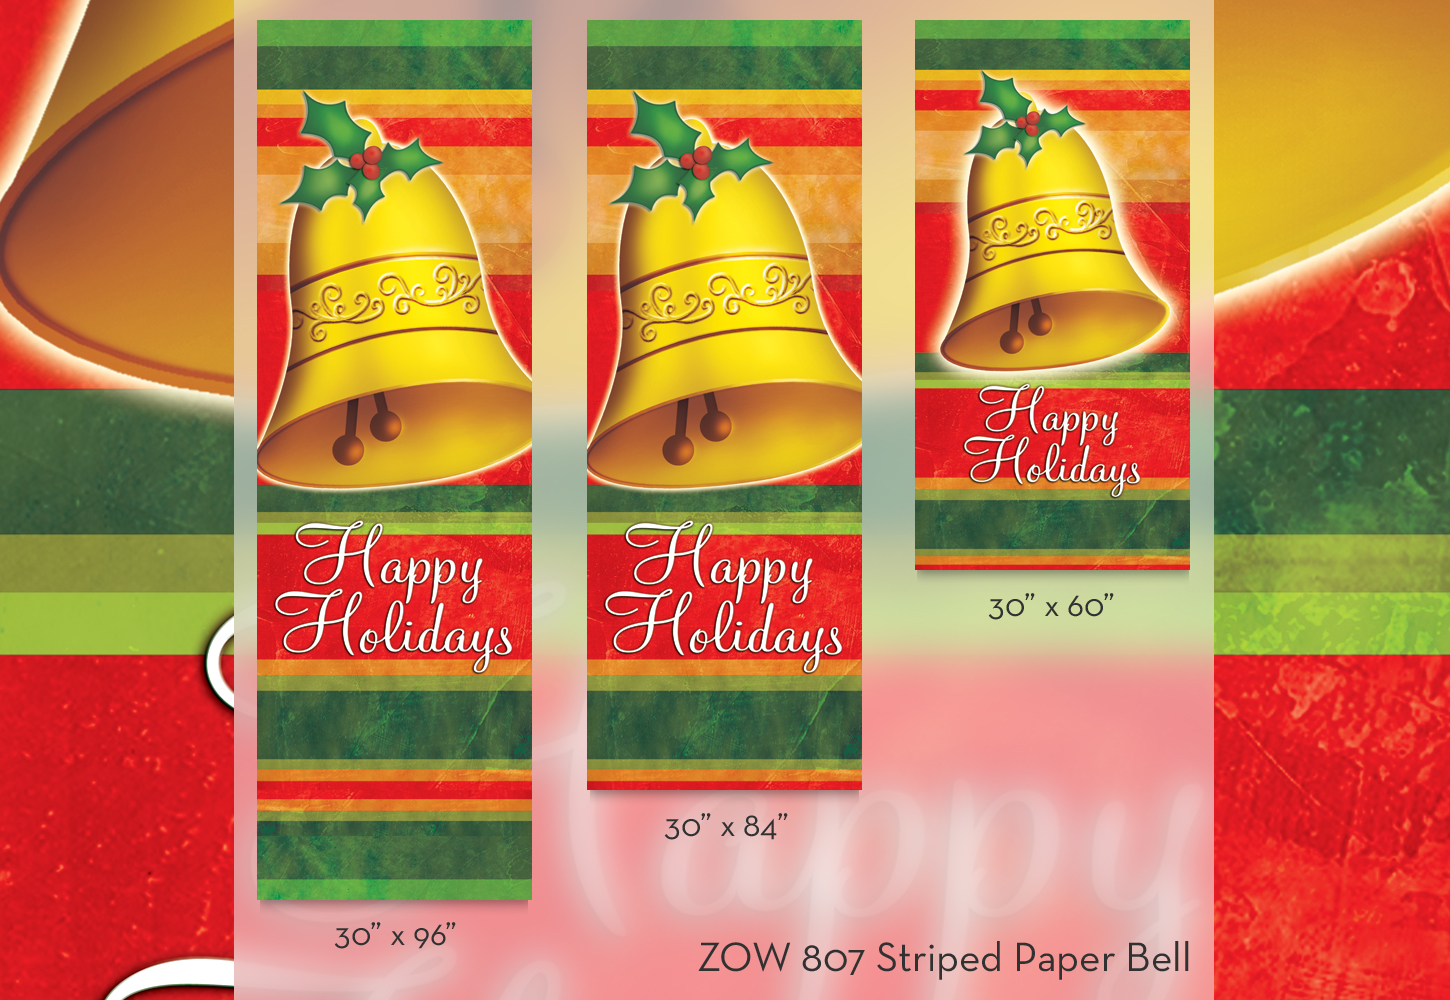 ZOW 807 Striped Paper Bell